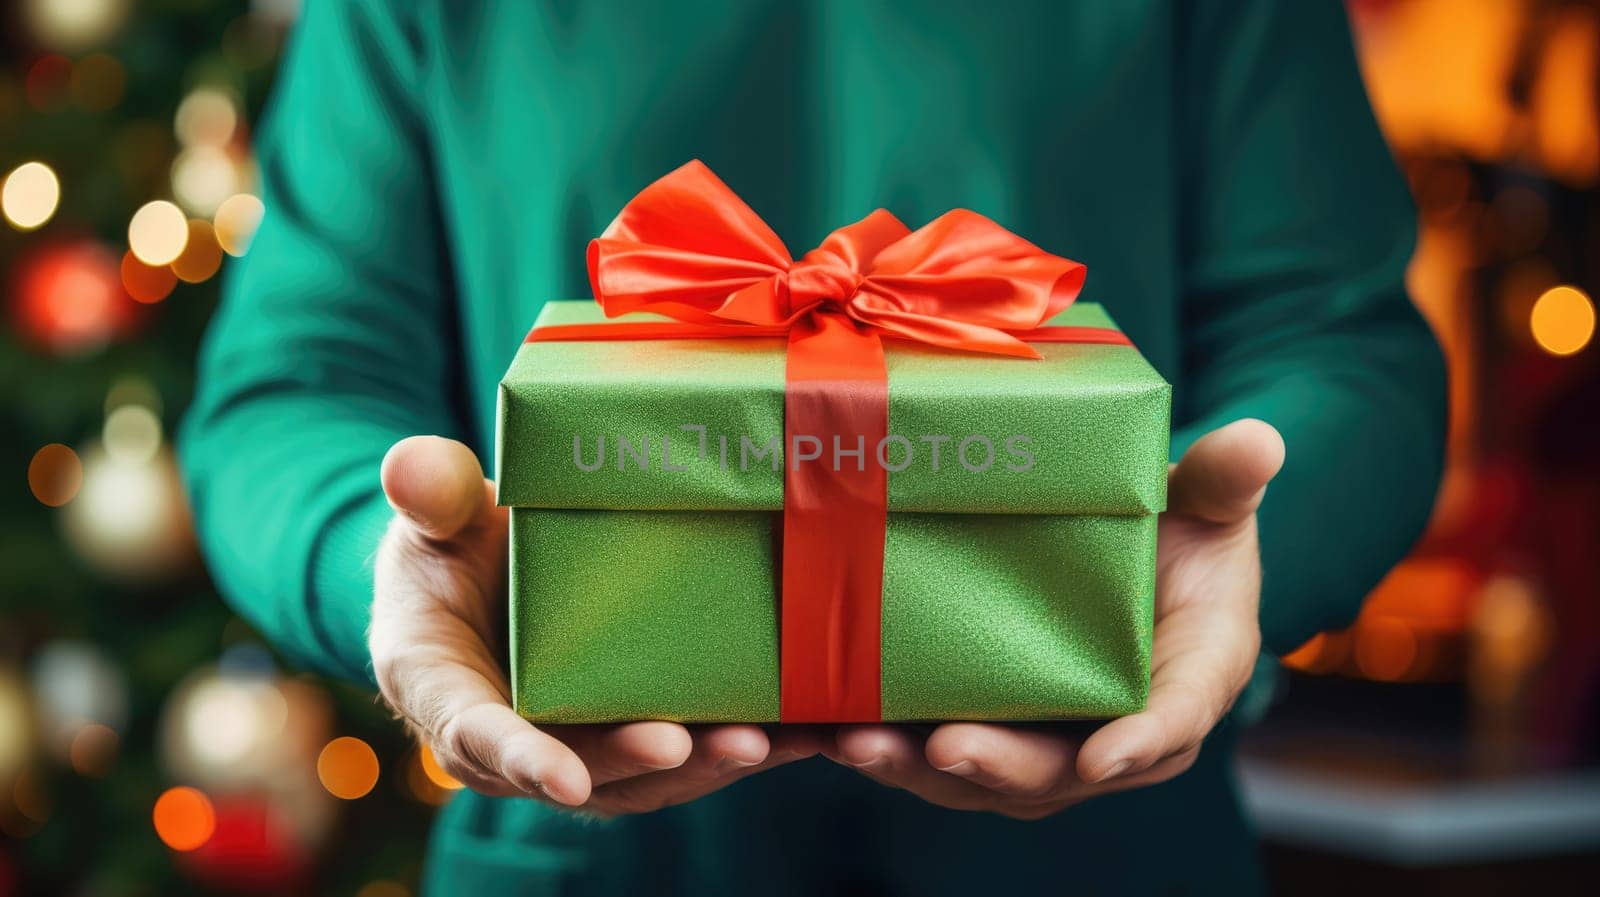 Shot of female hands holding a small gift box. Holidays and celebration concept. by JuliaDorian